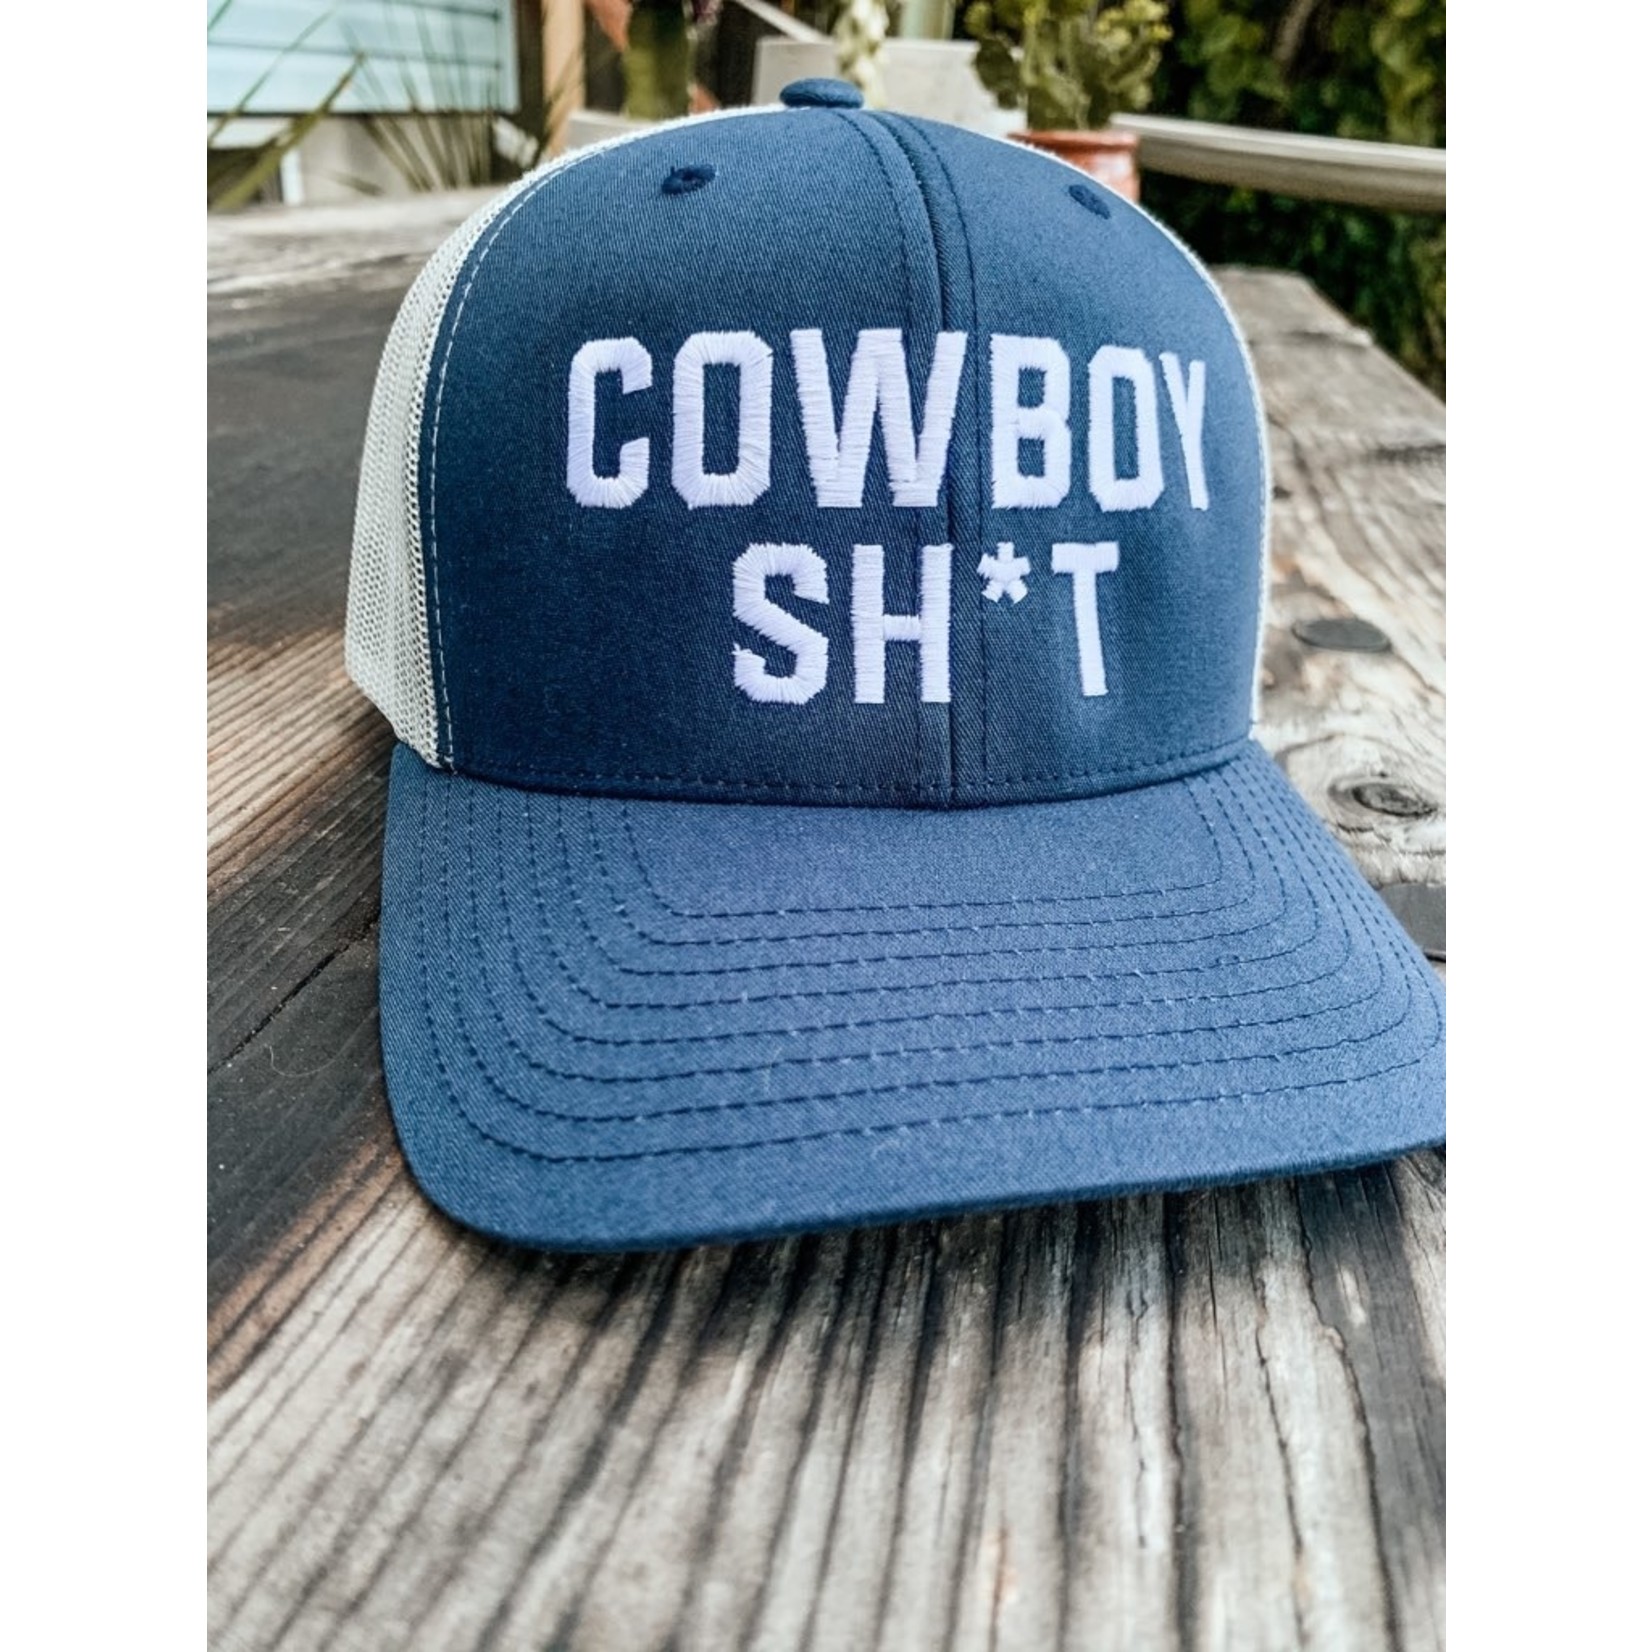 Everything Cowboy Inc. Cowboy Shit - The Stavely cap Navy/White